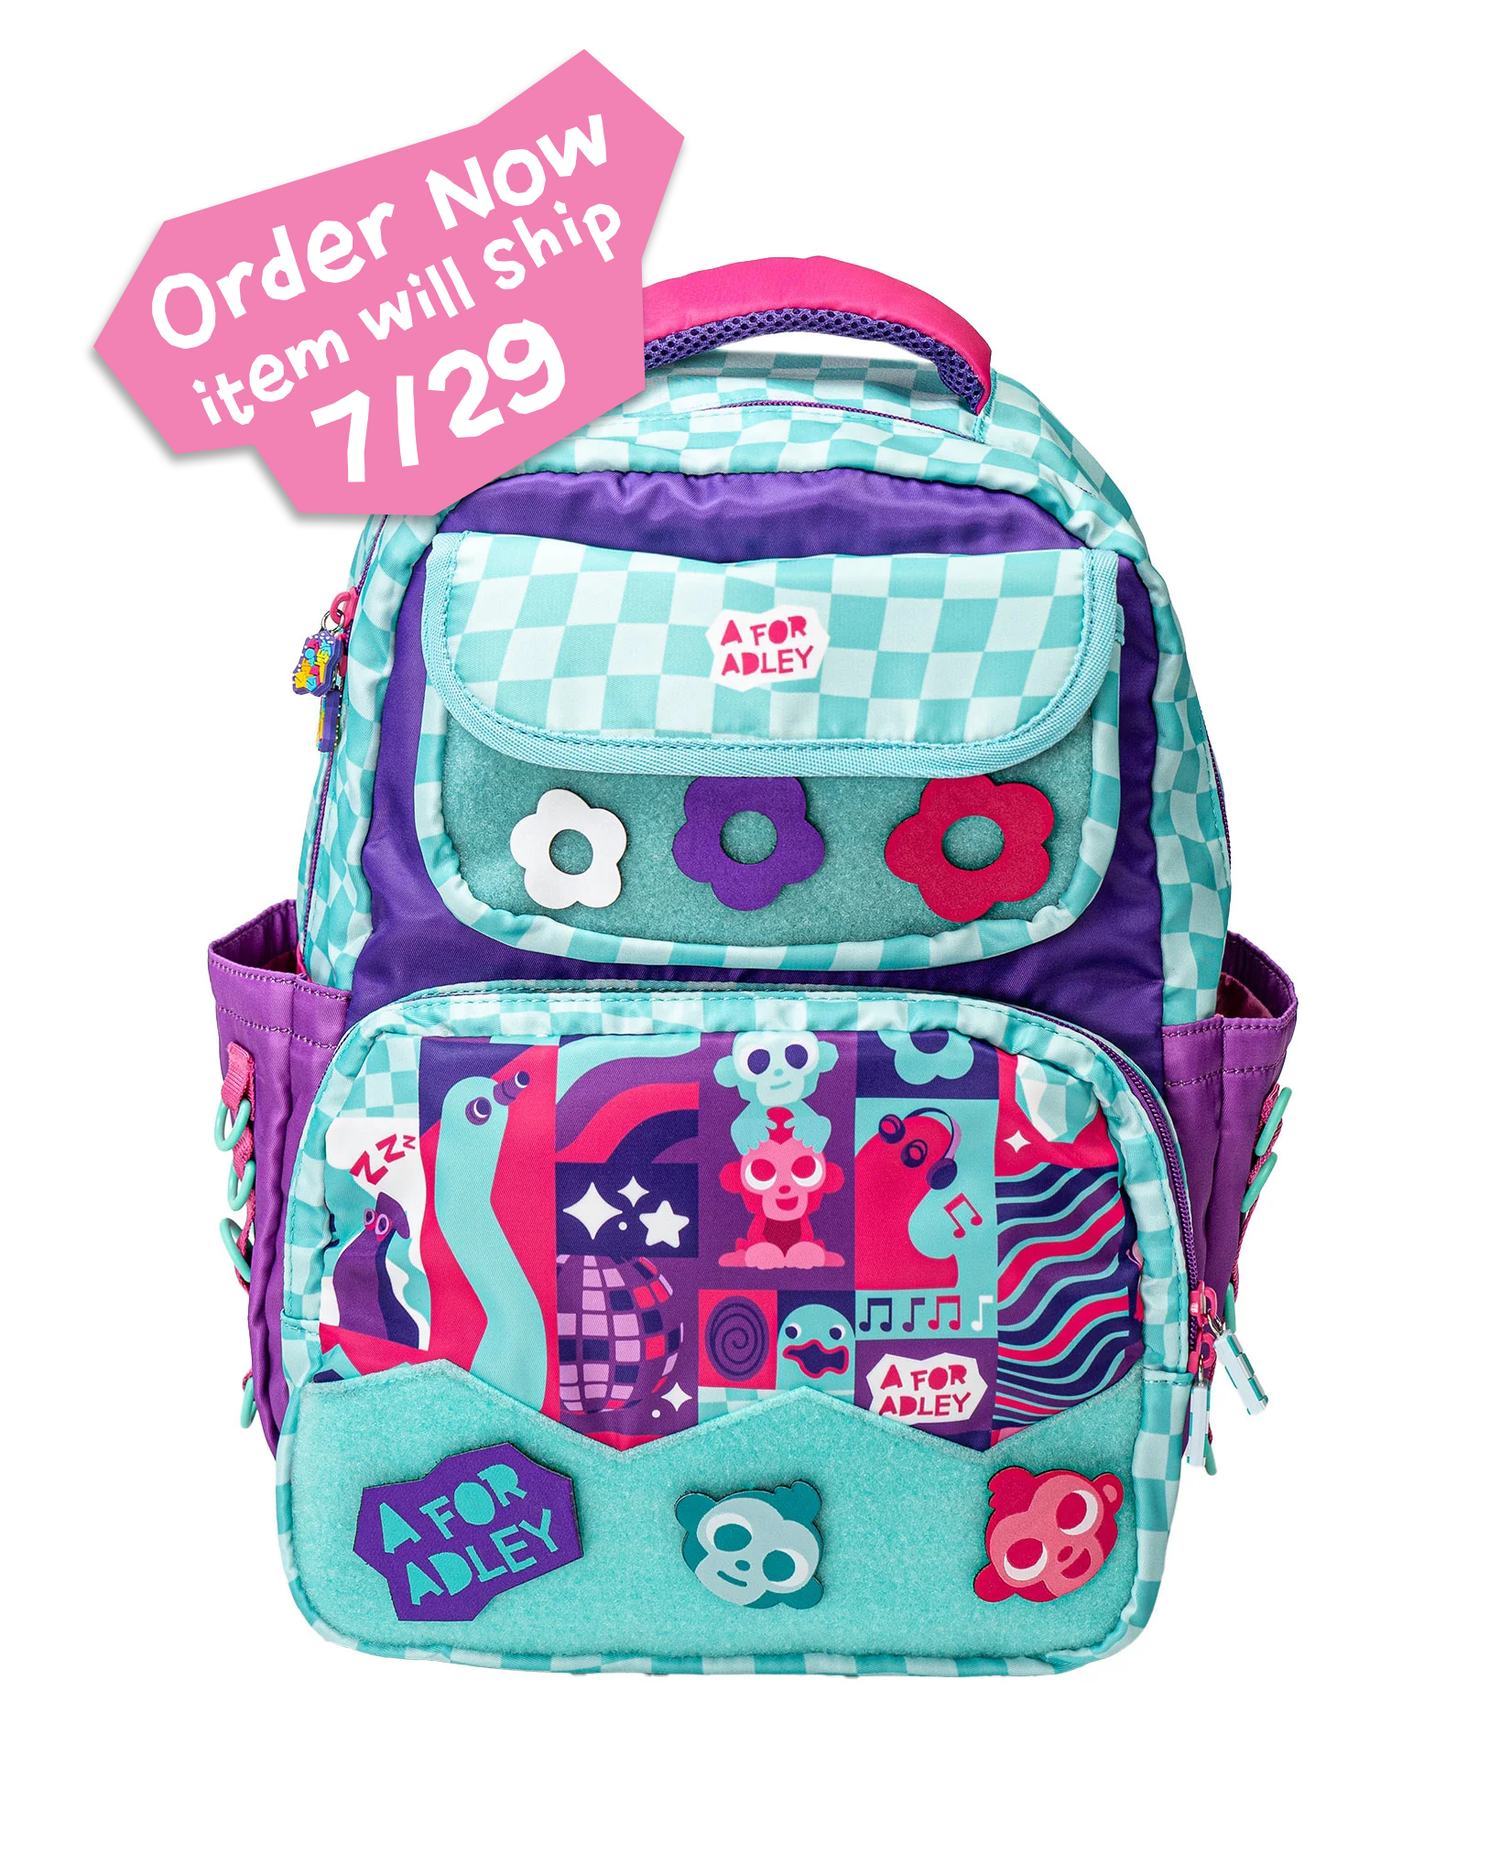 Adley's Retro Checkered Backpack (w/velcro patches)